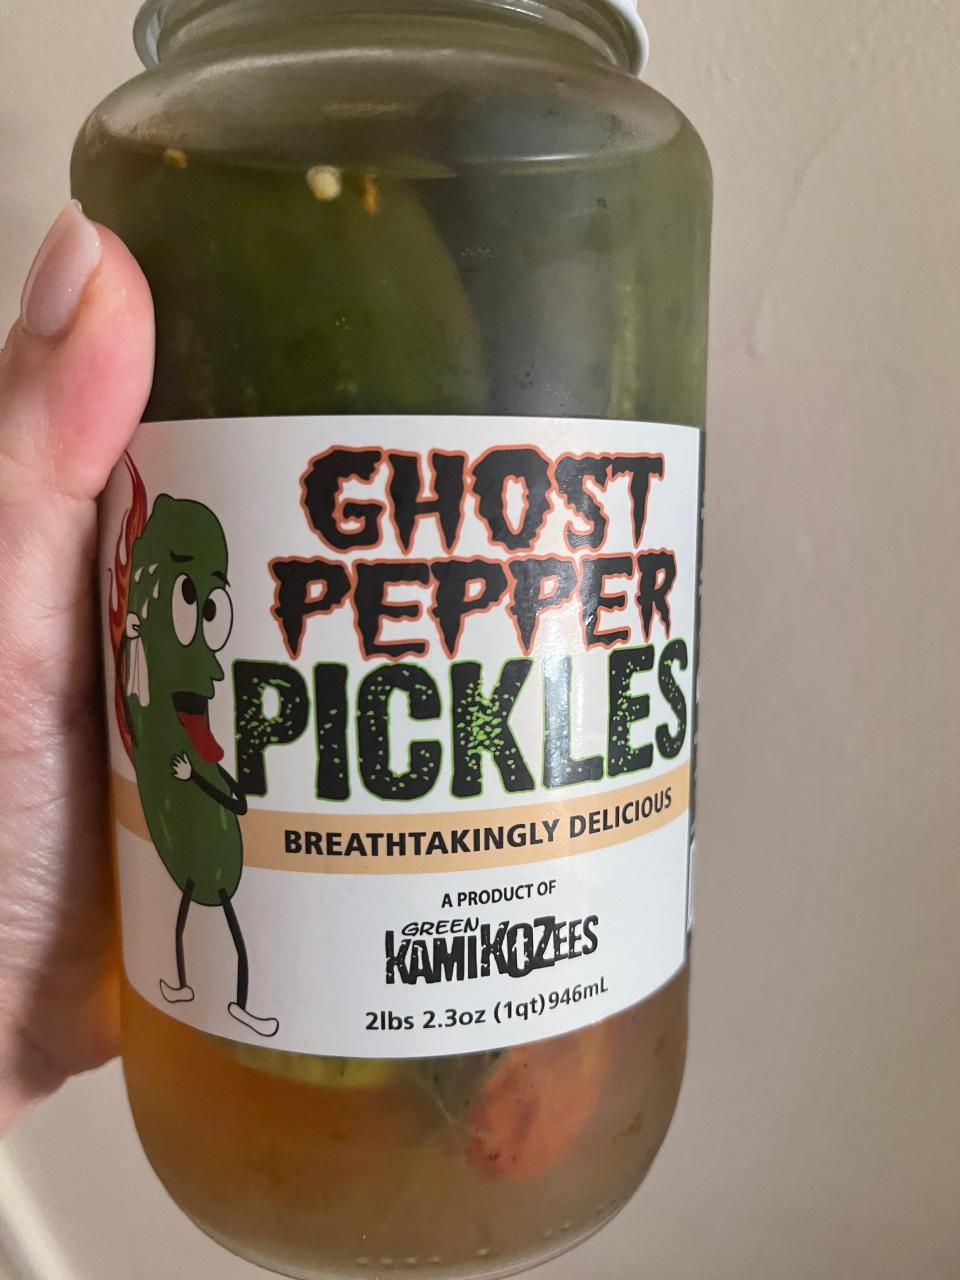 Ghost pepper pickles made by Green Kamikozees are a hit on TikTok.